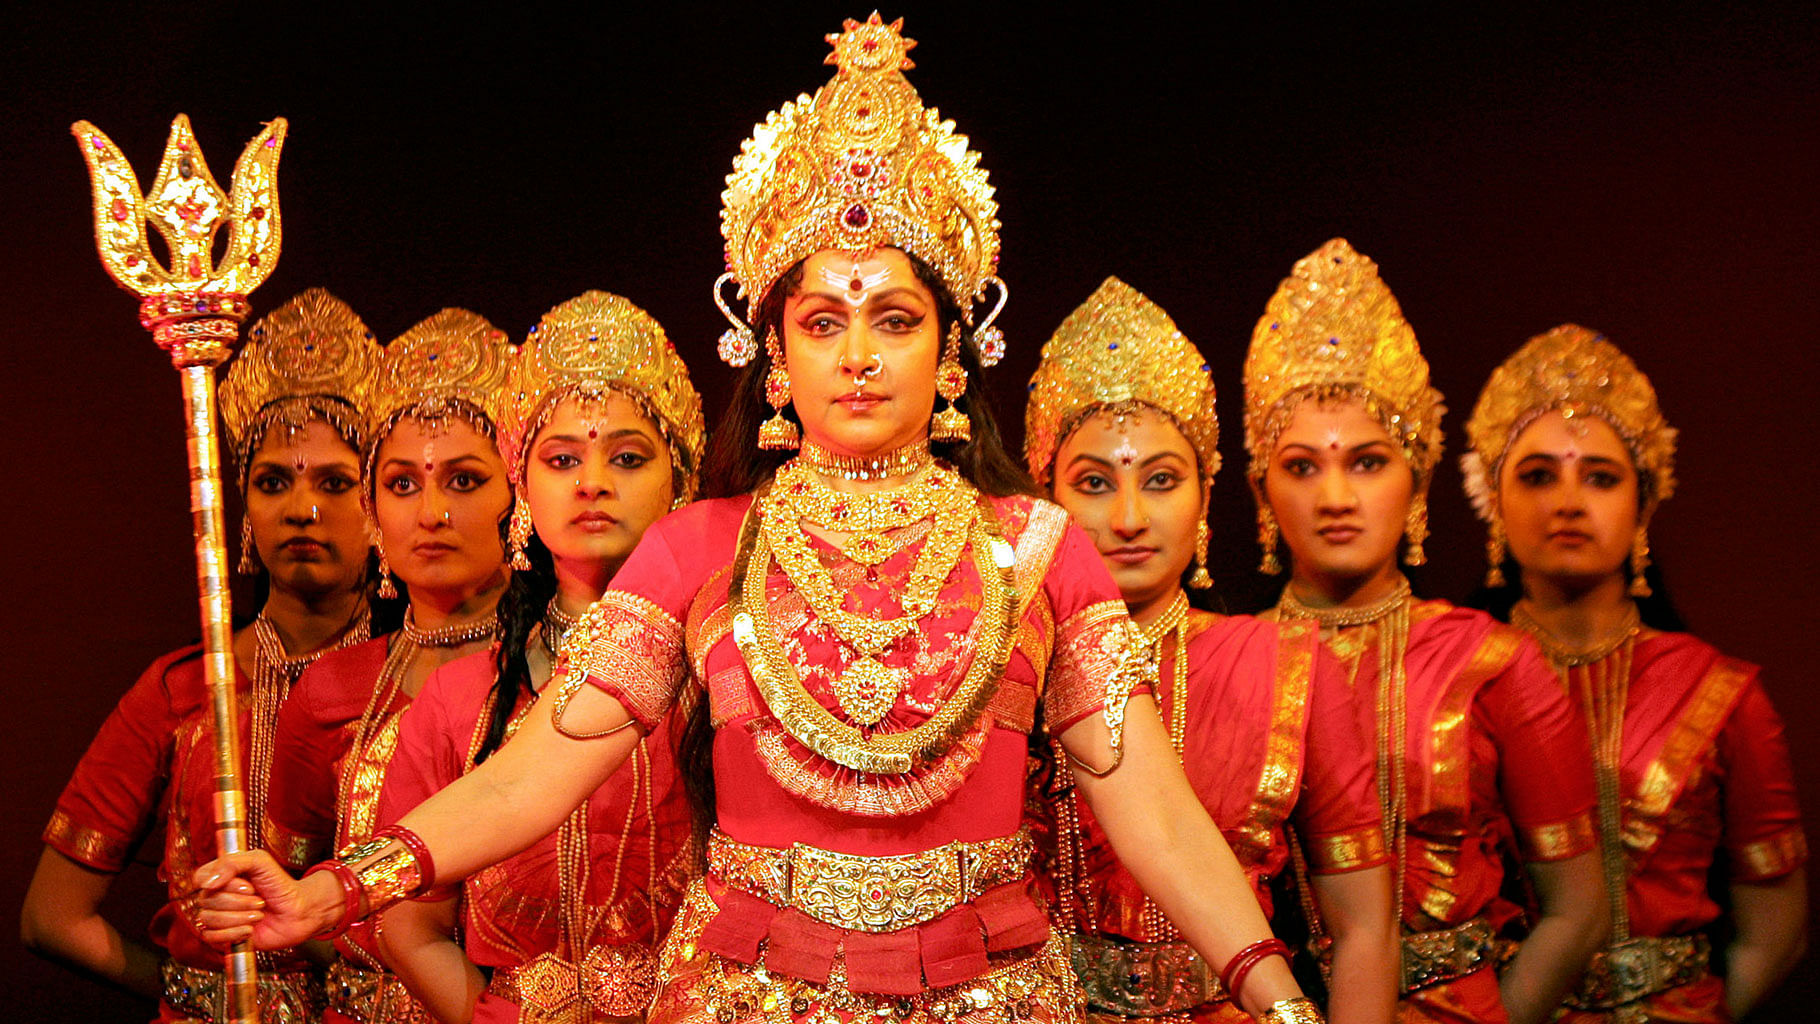 Hema Malini performs at the opening of a film festival in Chandigarh in 2008 (Photo: Reuters)